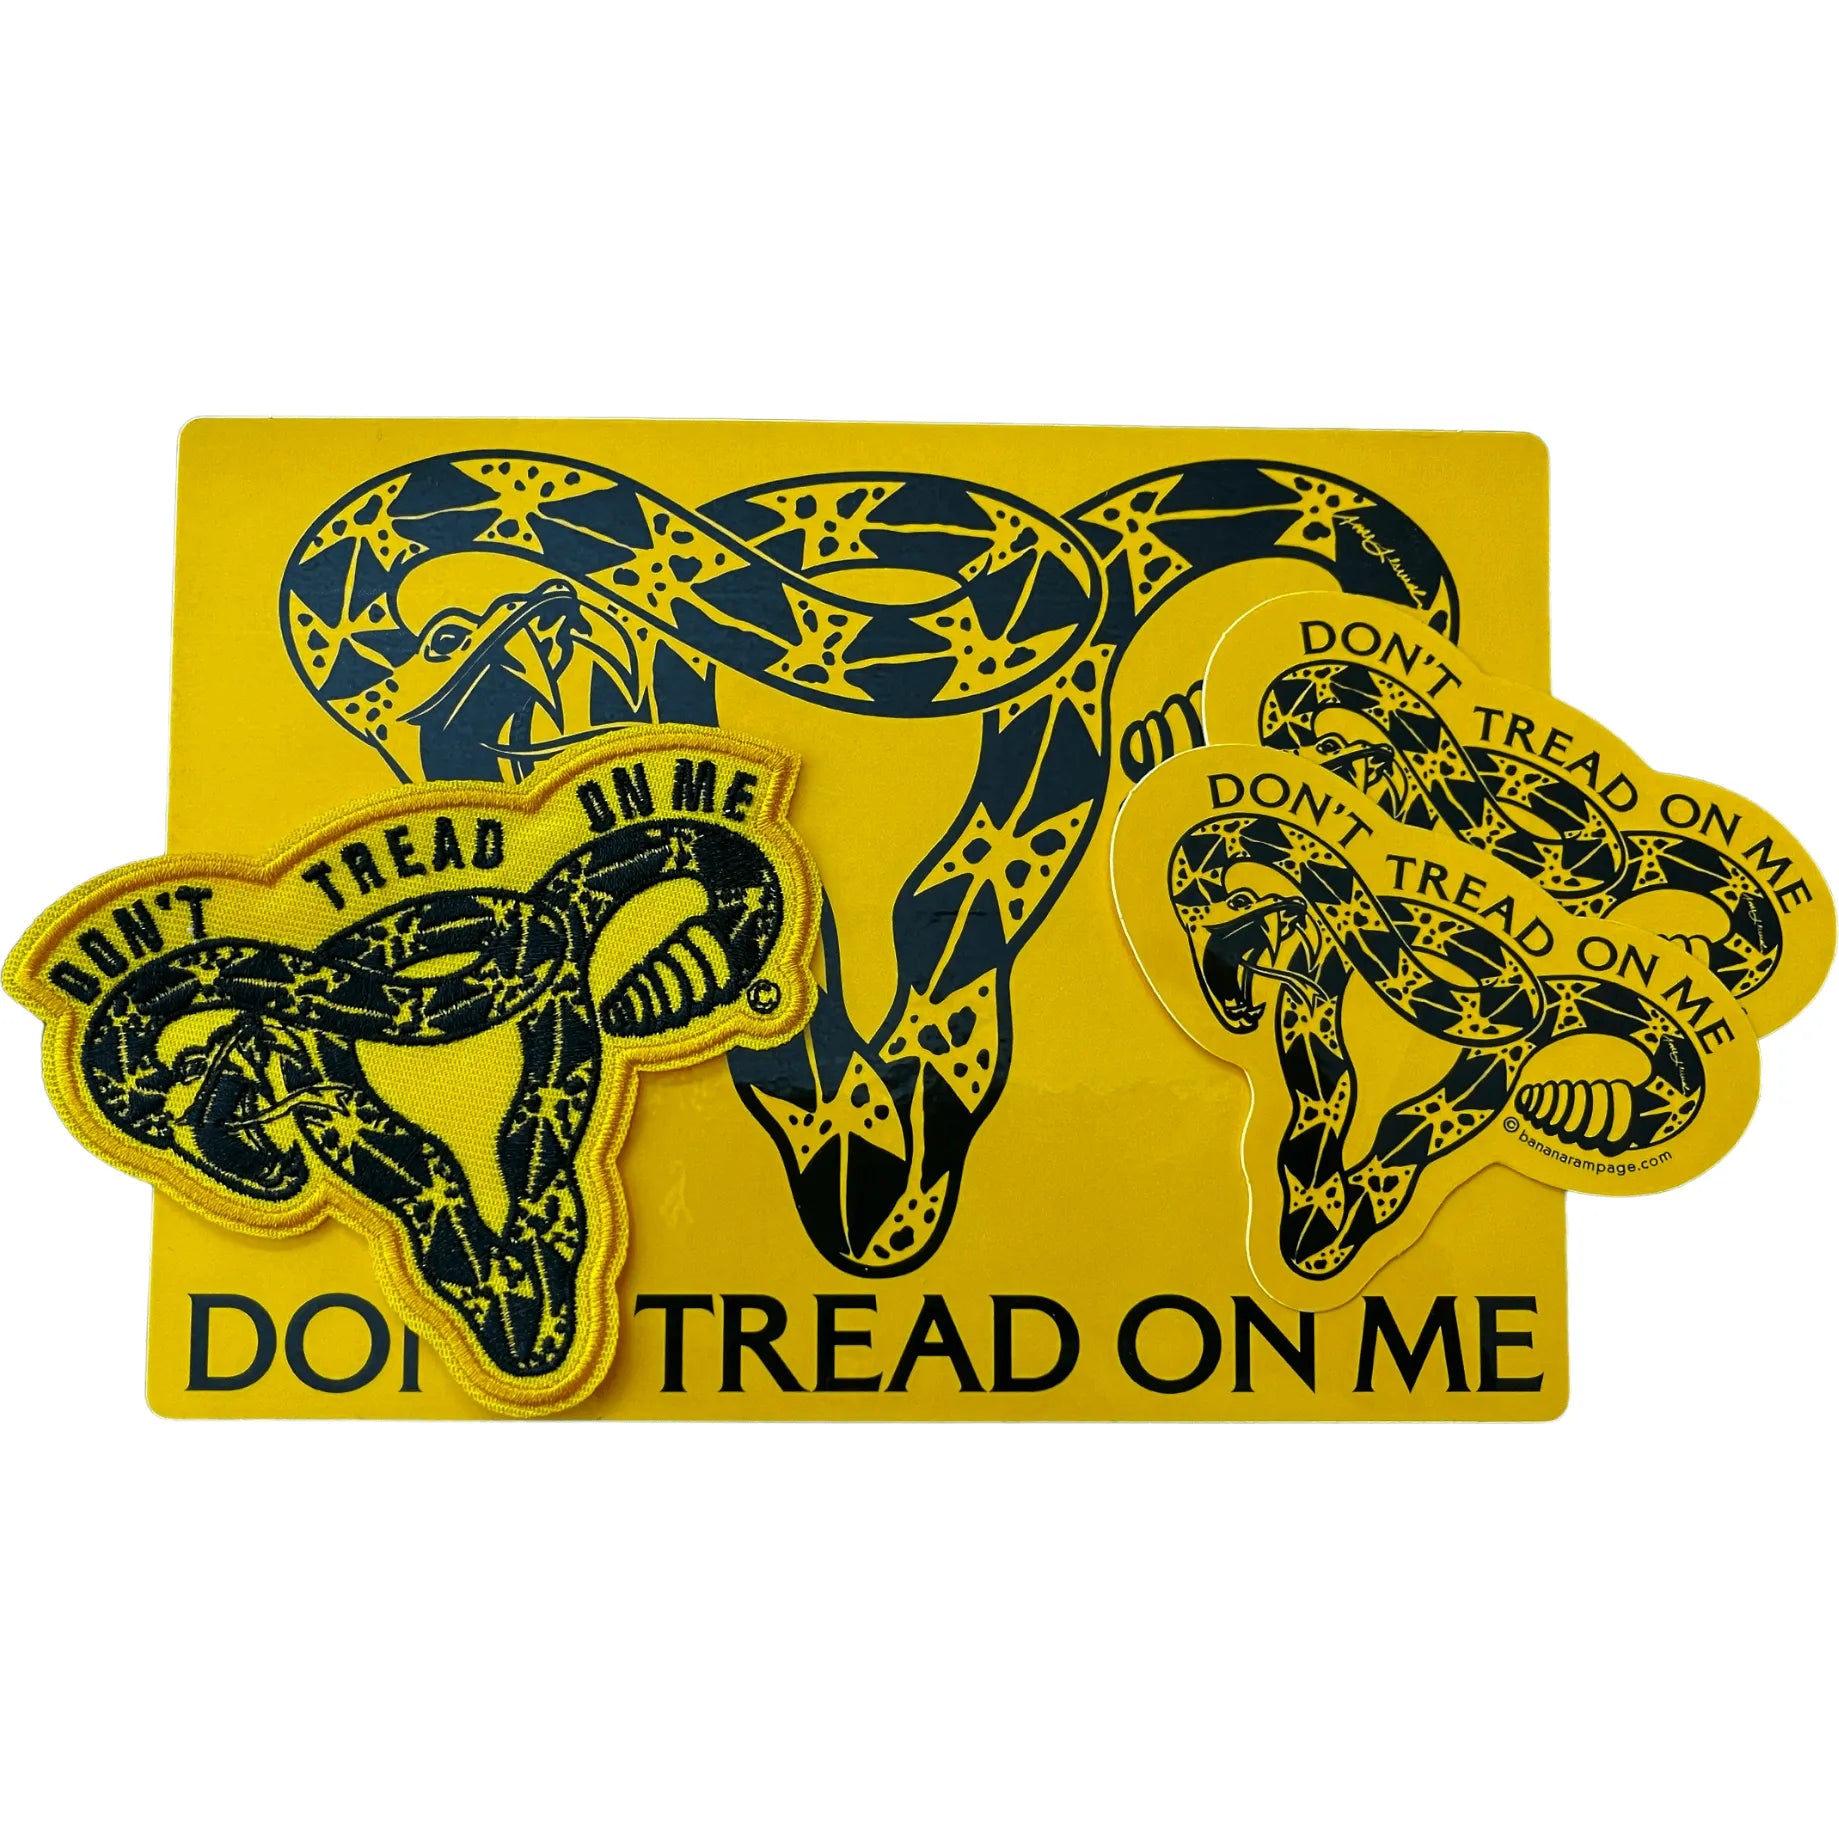 Don’t Tread On Me Uterus Patch & Bumper Sticker Gift Pack